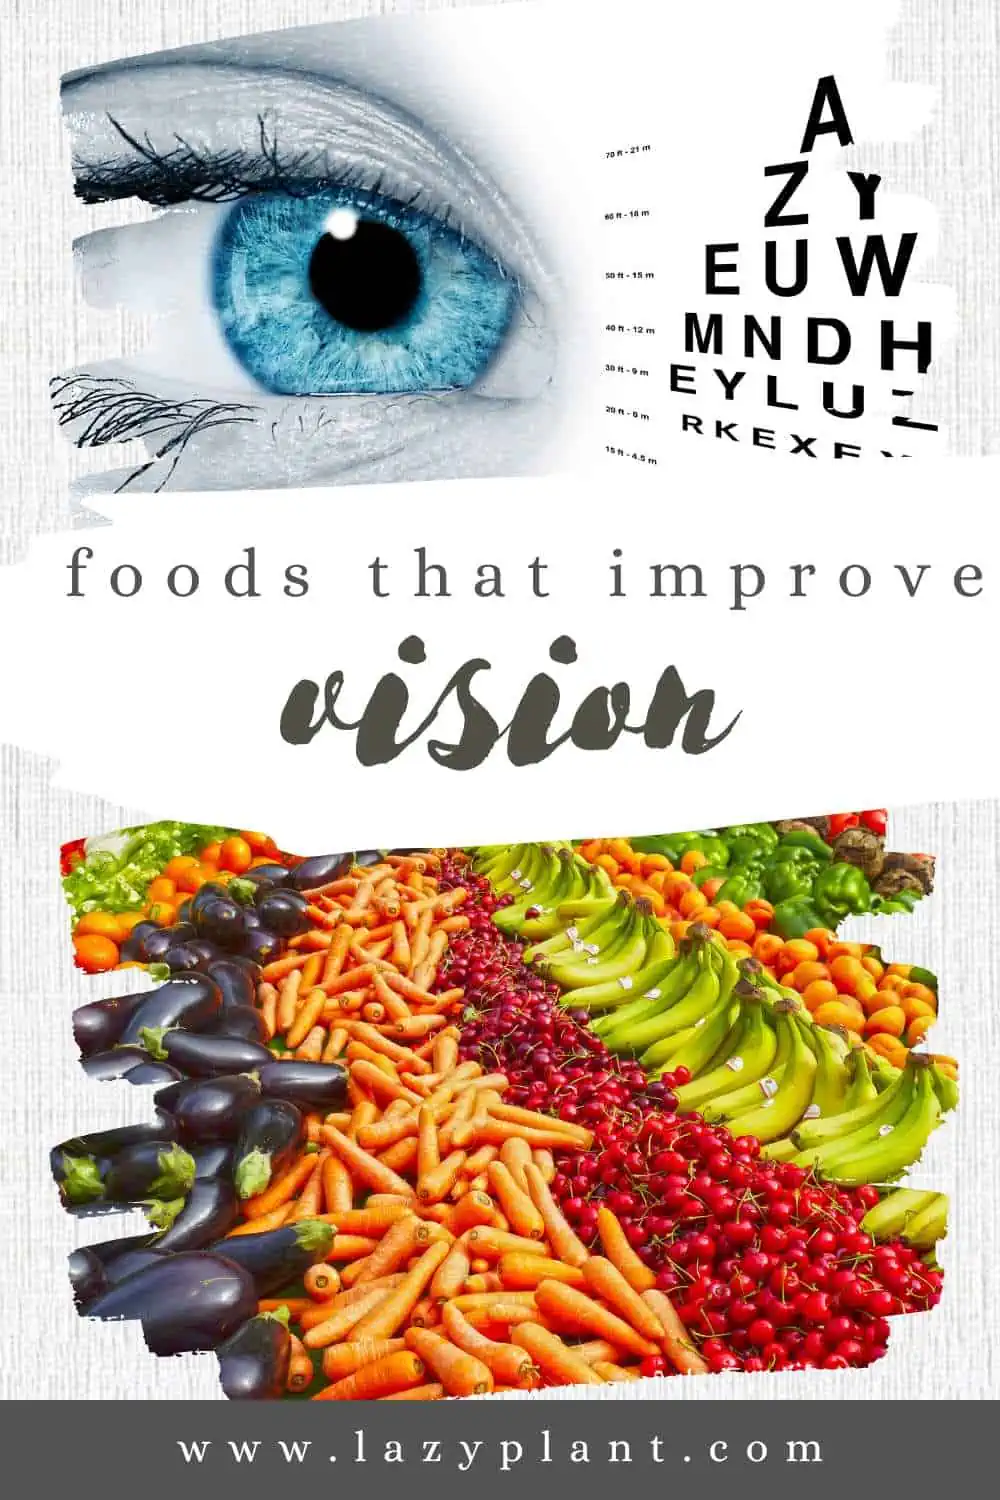 Which foods can improve eyesight in a natural way?